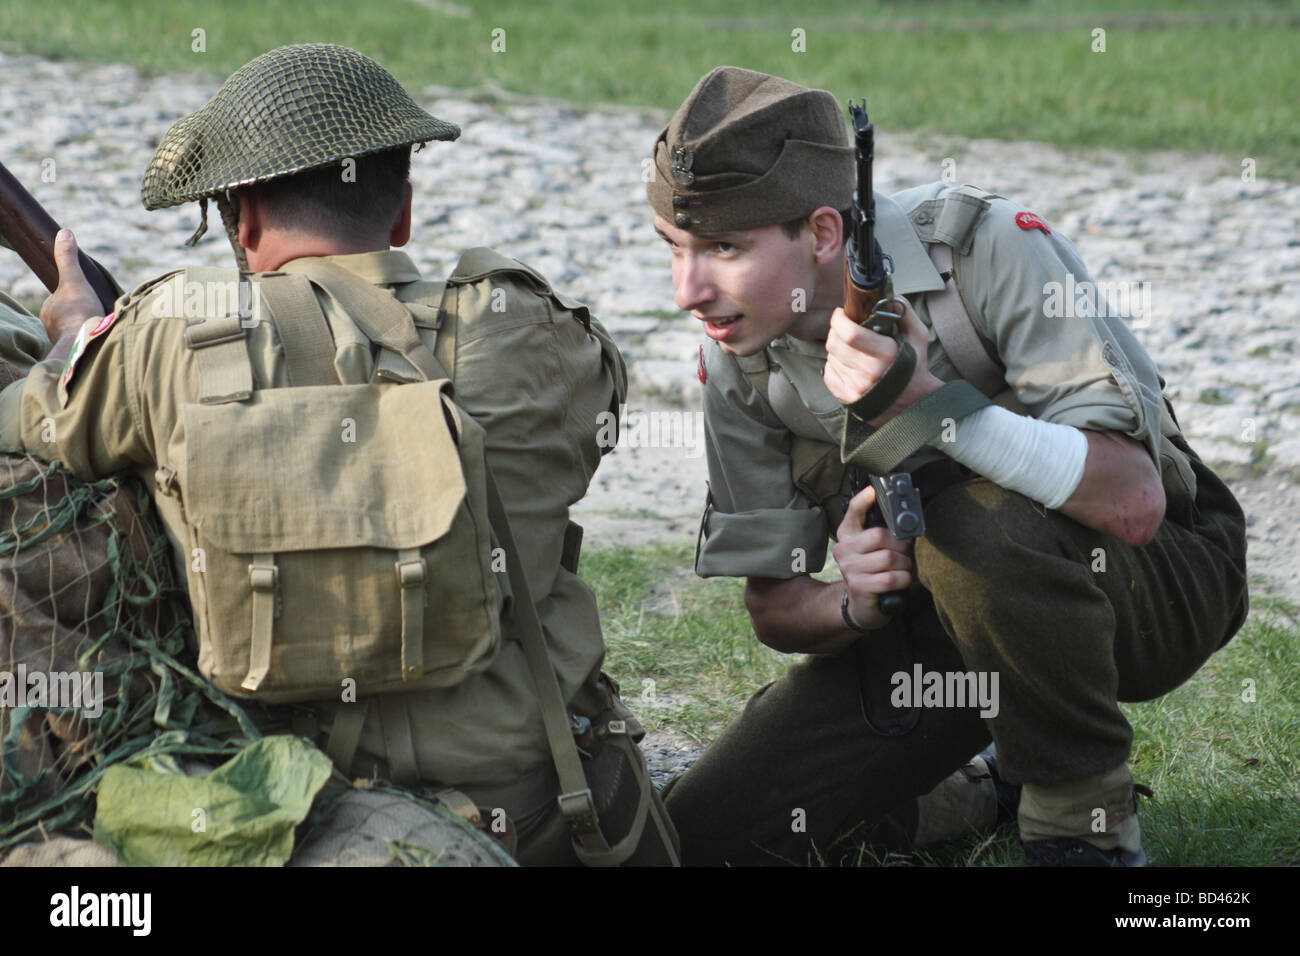 Re-enactment of important second war act - Battle of Monte Cassino. Annual event in Ogrodzieniec, Poland. Stock Photo